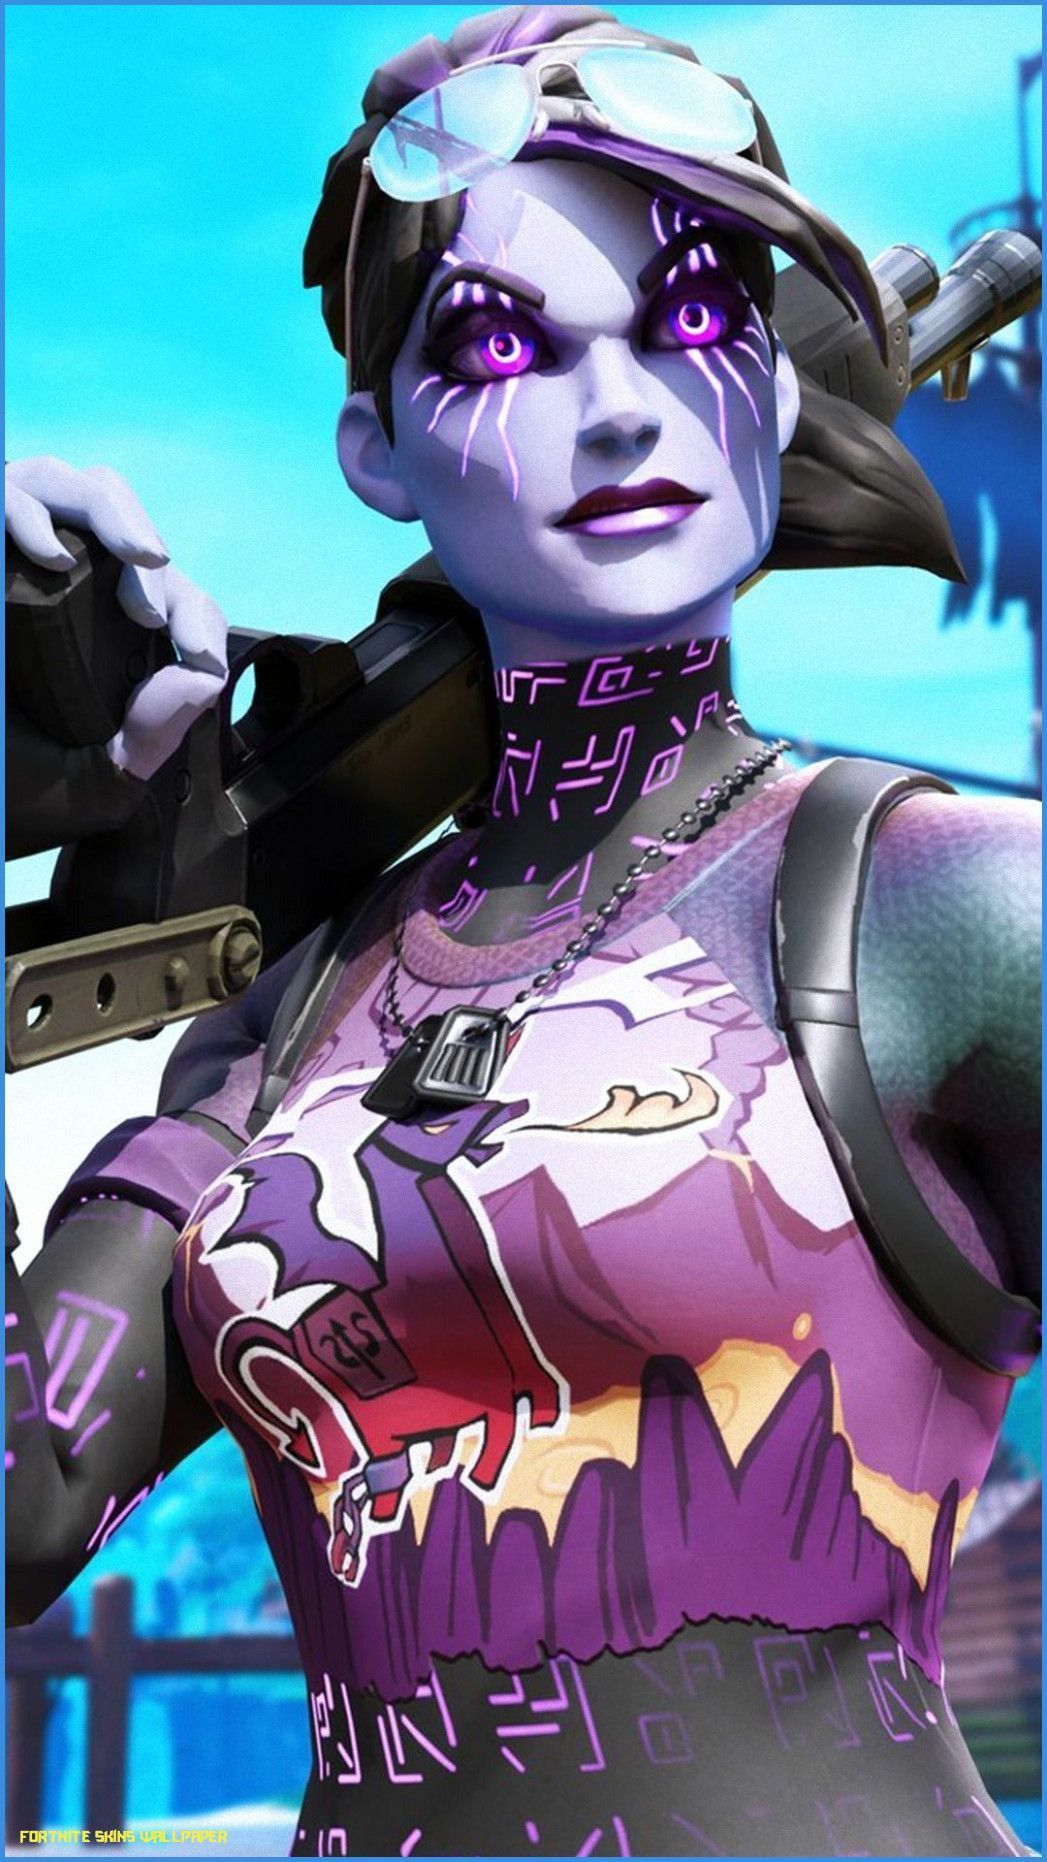 A woman with purple eyes and holding an assault rifle - Fortnite